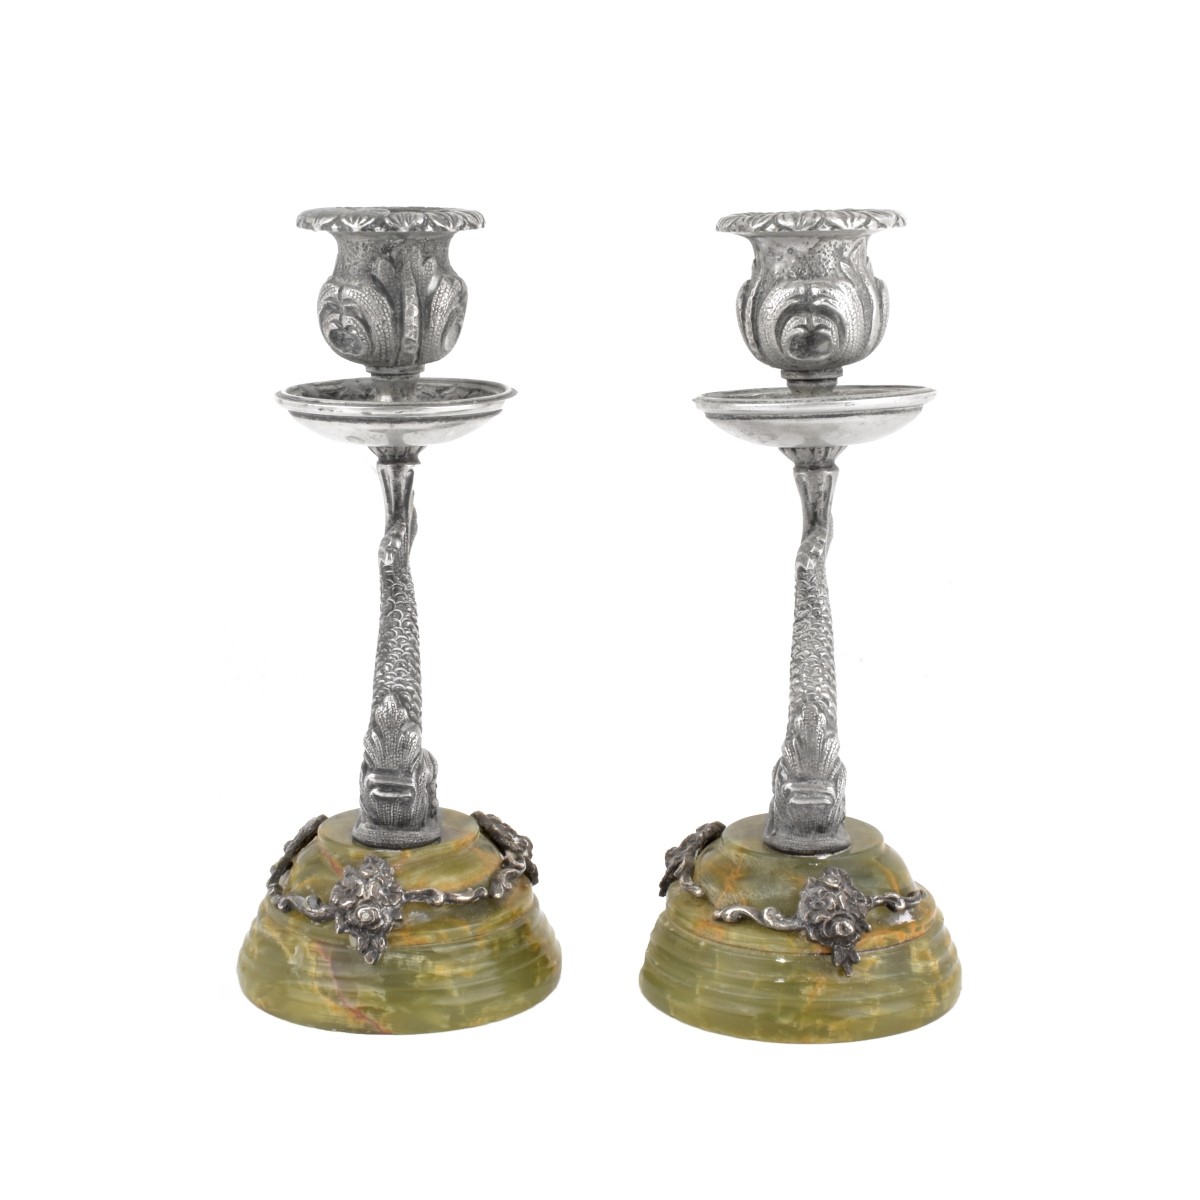 Pair of Empire Style Dolphin Candlesticks